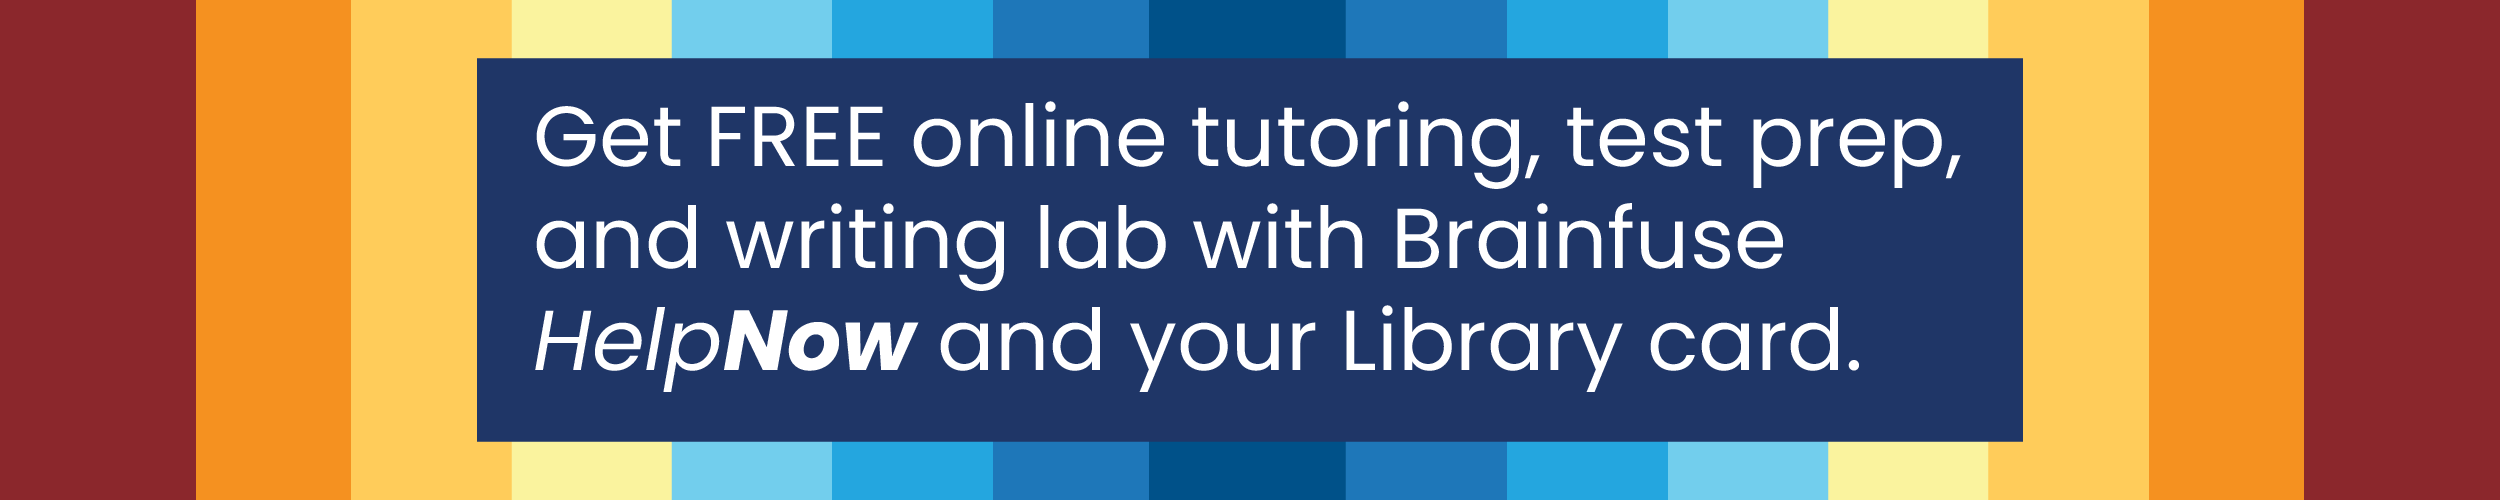 Get FREE online tutoring, test prep, and writing lab with Brainfuse HelpNow and your Library card.